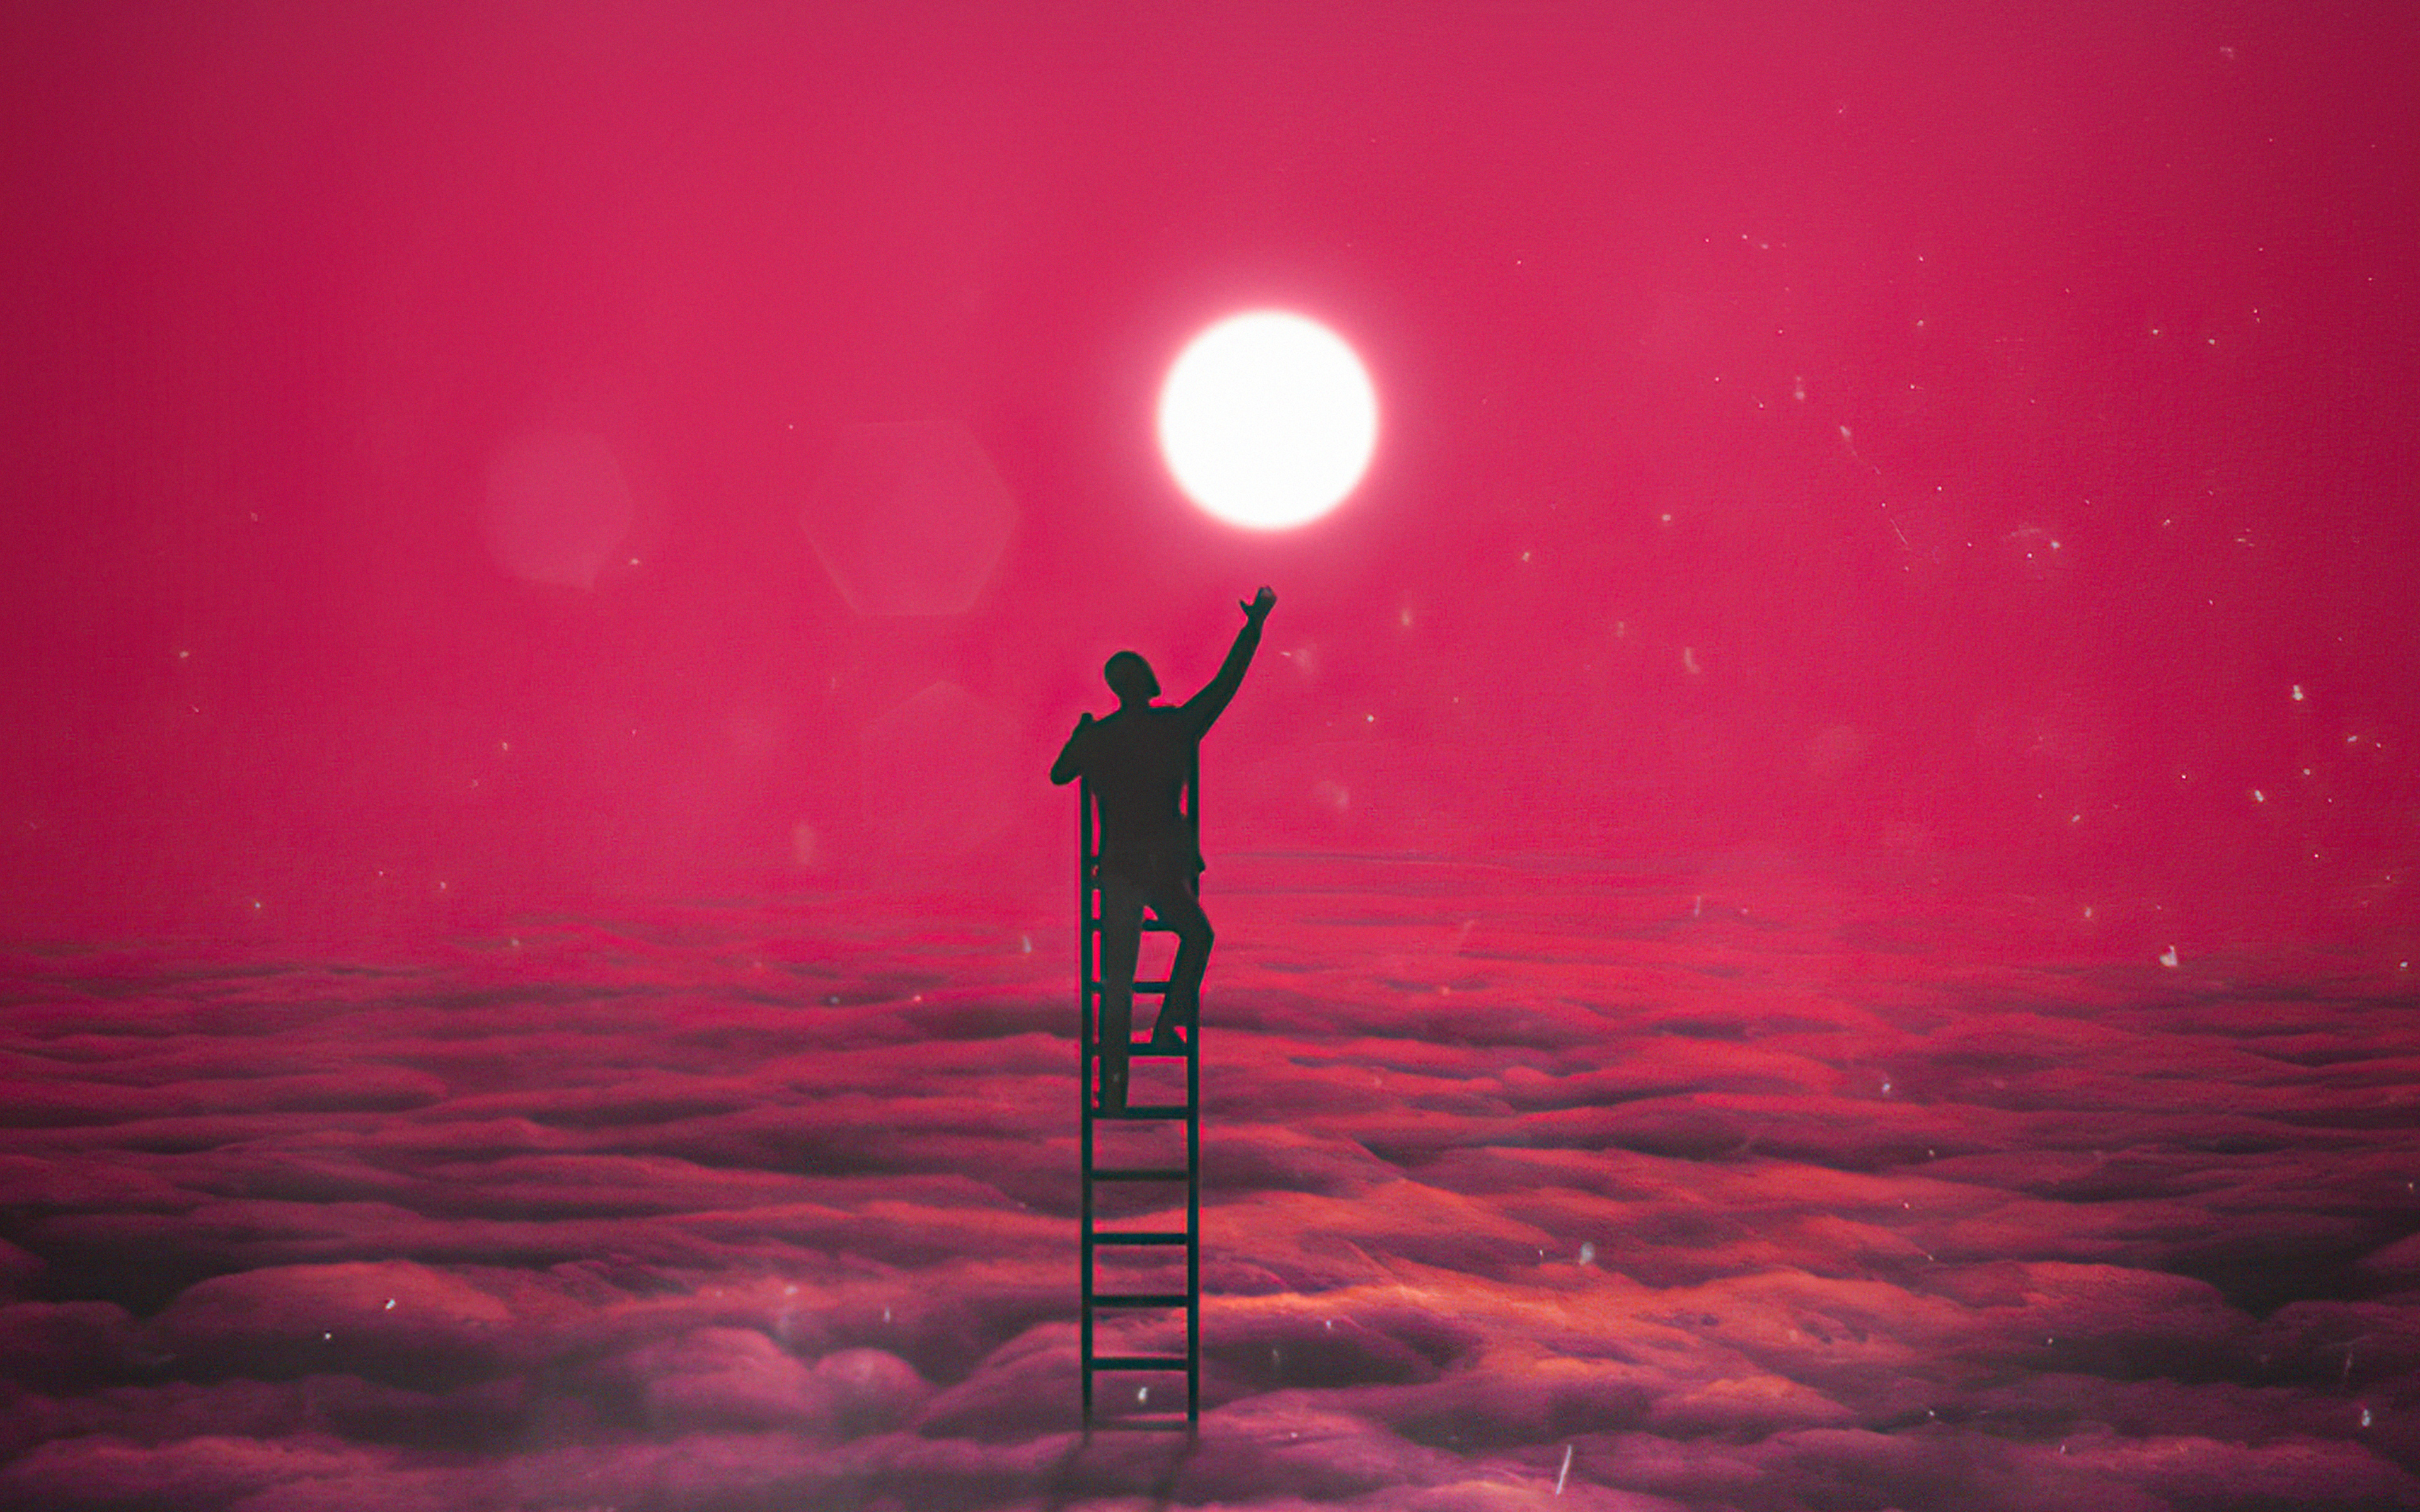 Climbing The Ladder To Touch The Moon 4k HD 4k Wallpaper, Image, Background, Photo and Picture